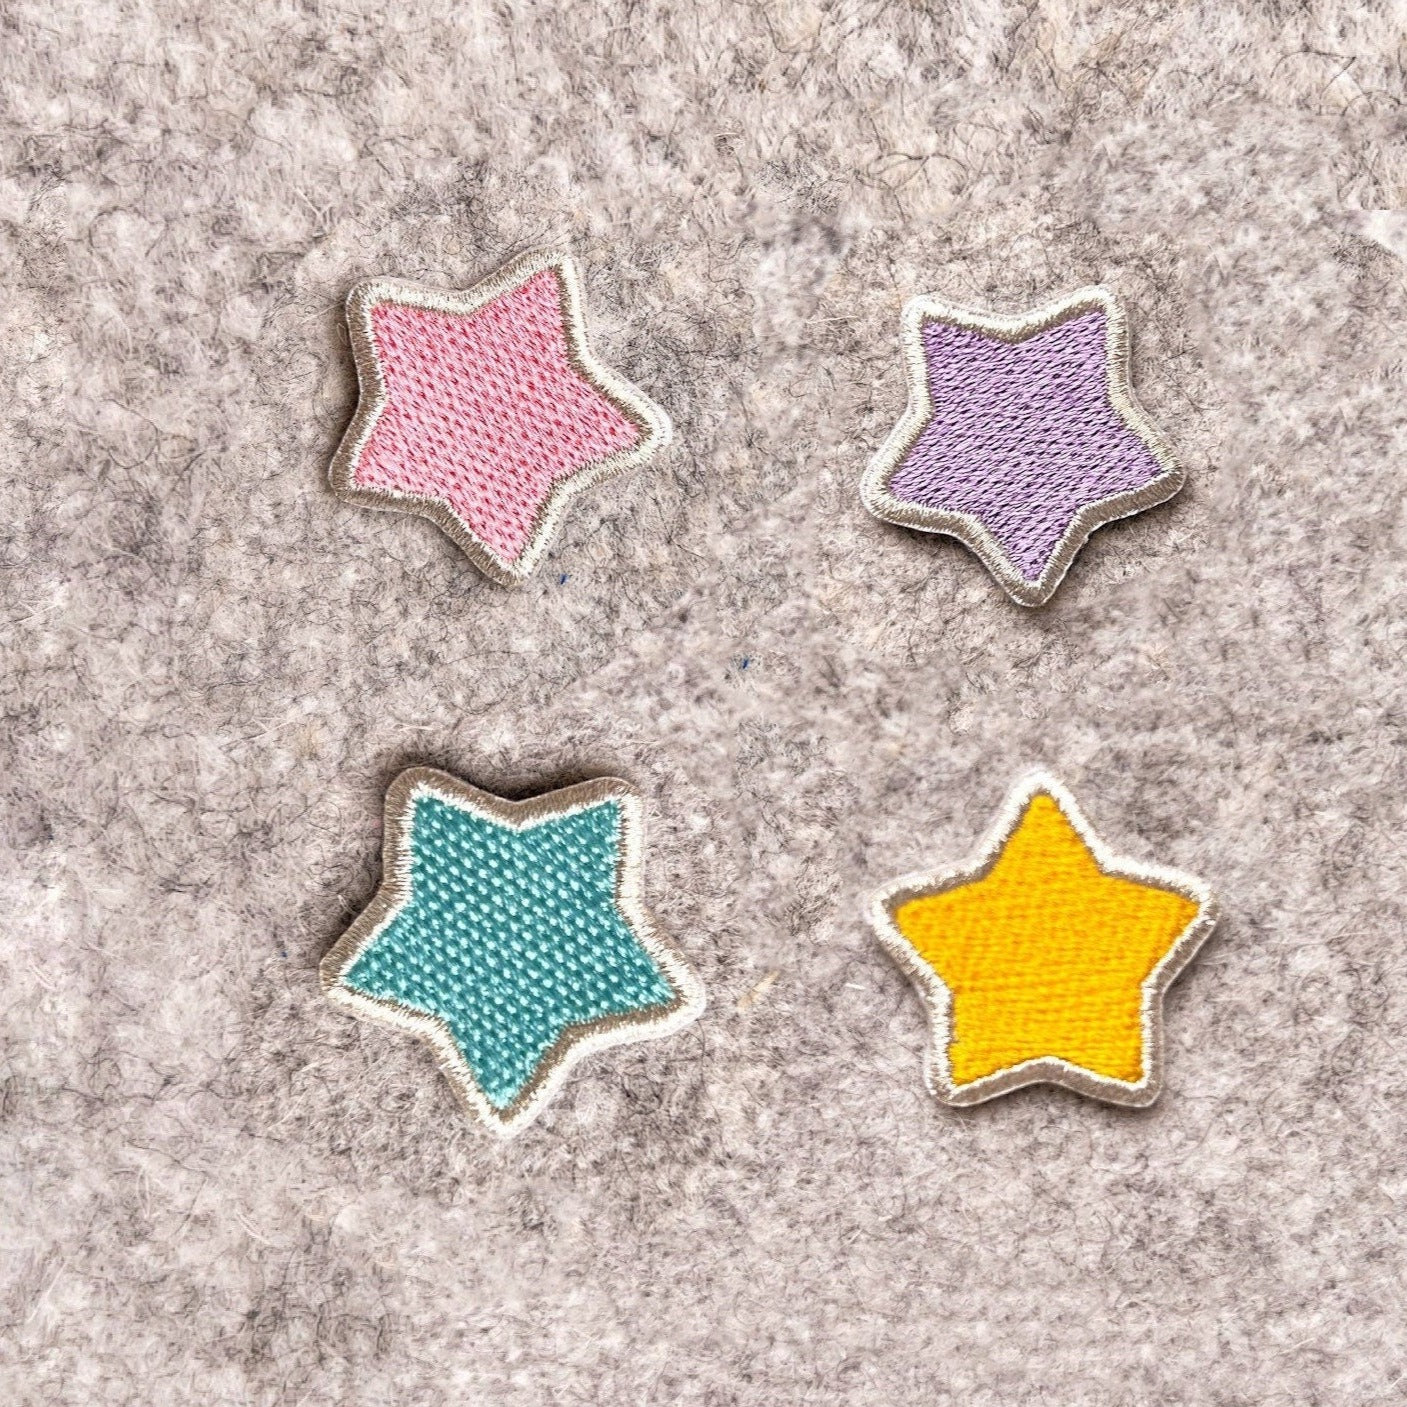 Star Iron-on Patches, Cute Patches, Star Patches for Kids